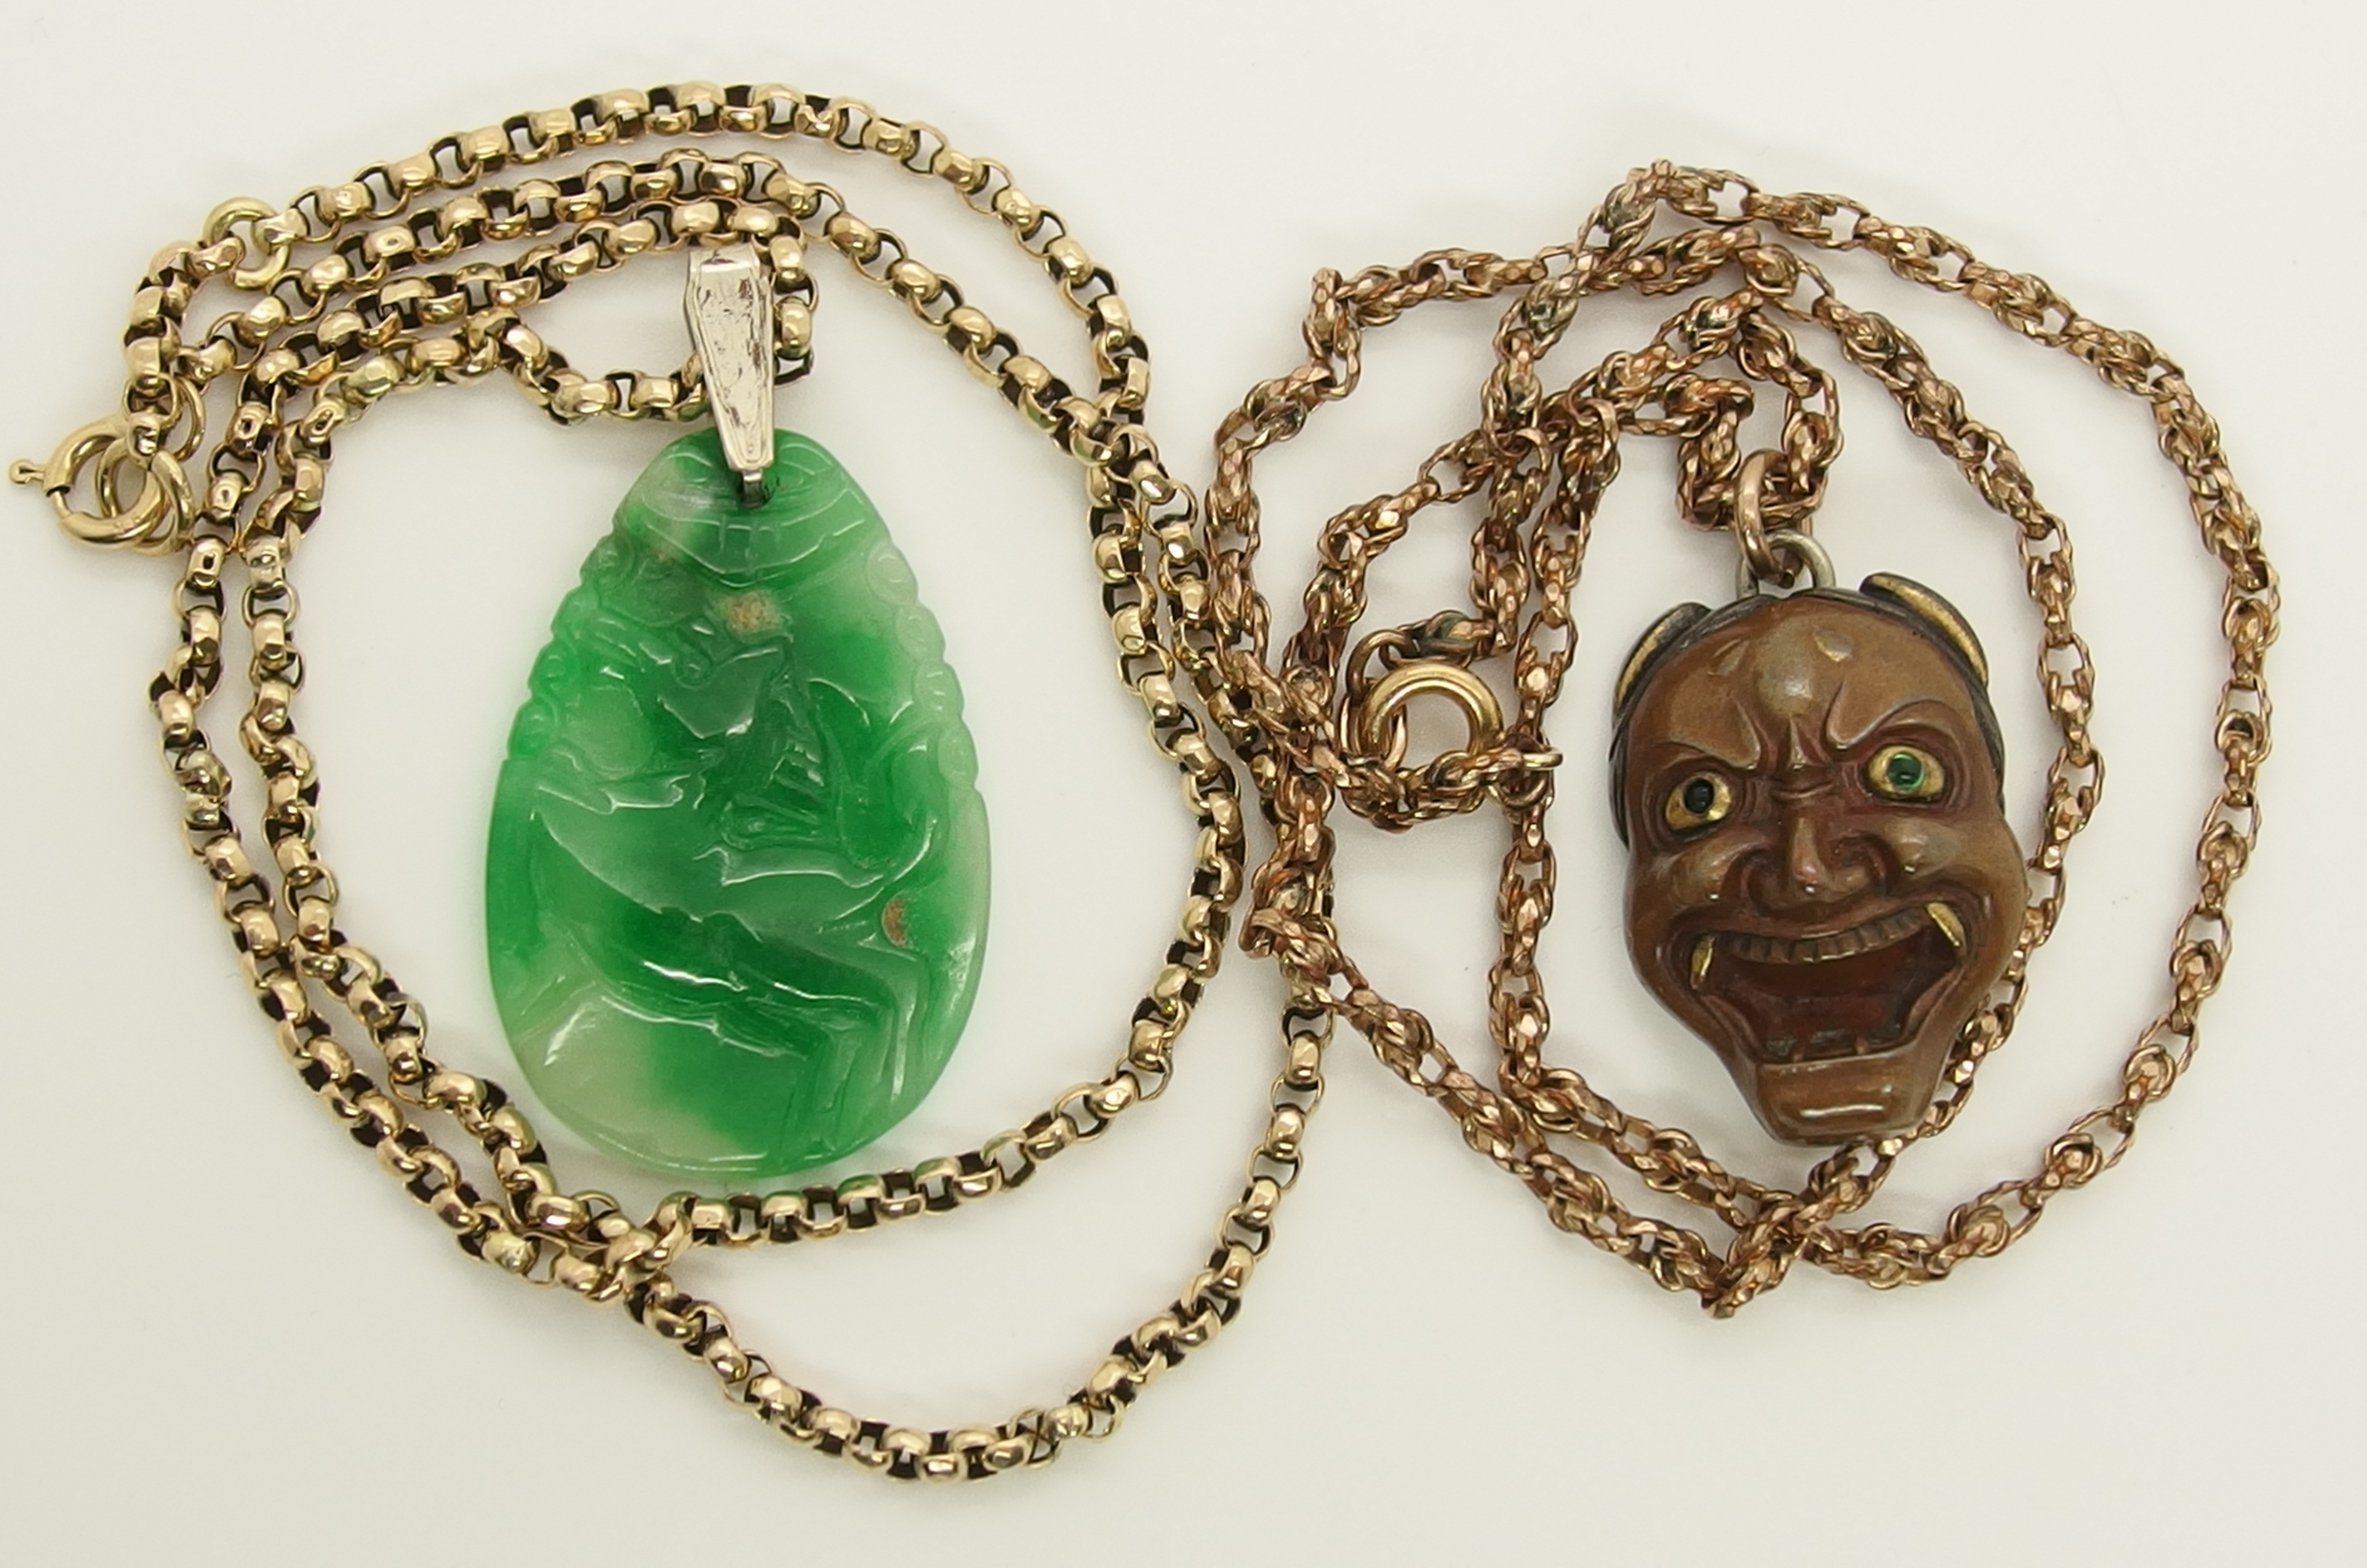 A Chinese green hardstone pendant and a Japanese demon mask pendant the hardstone pendant is - Image 2 of 7